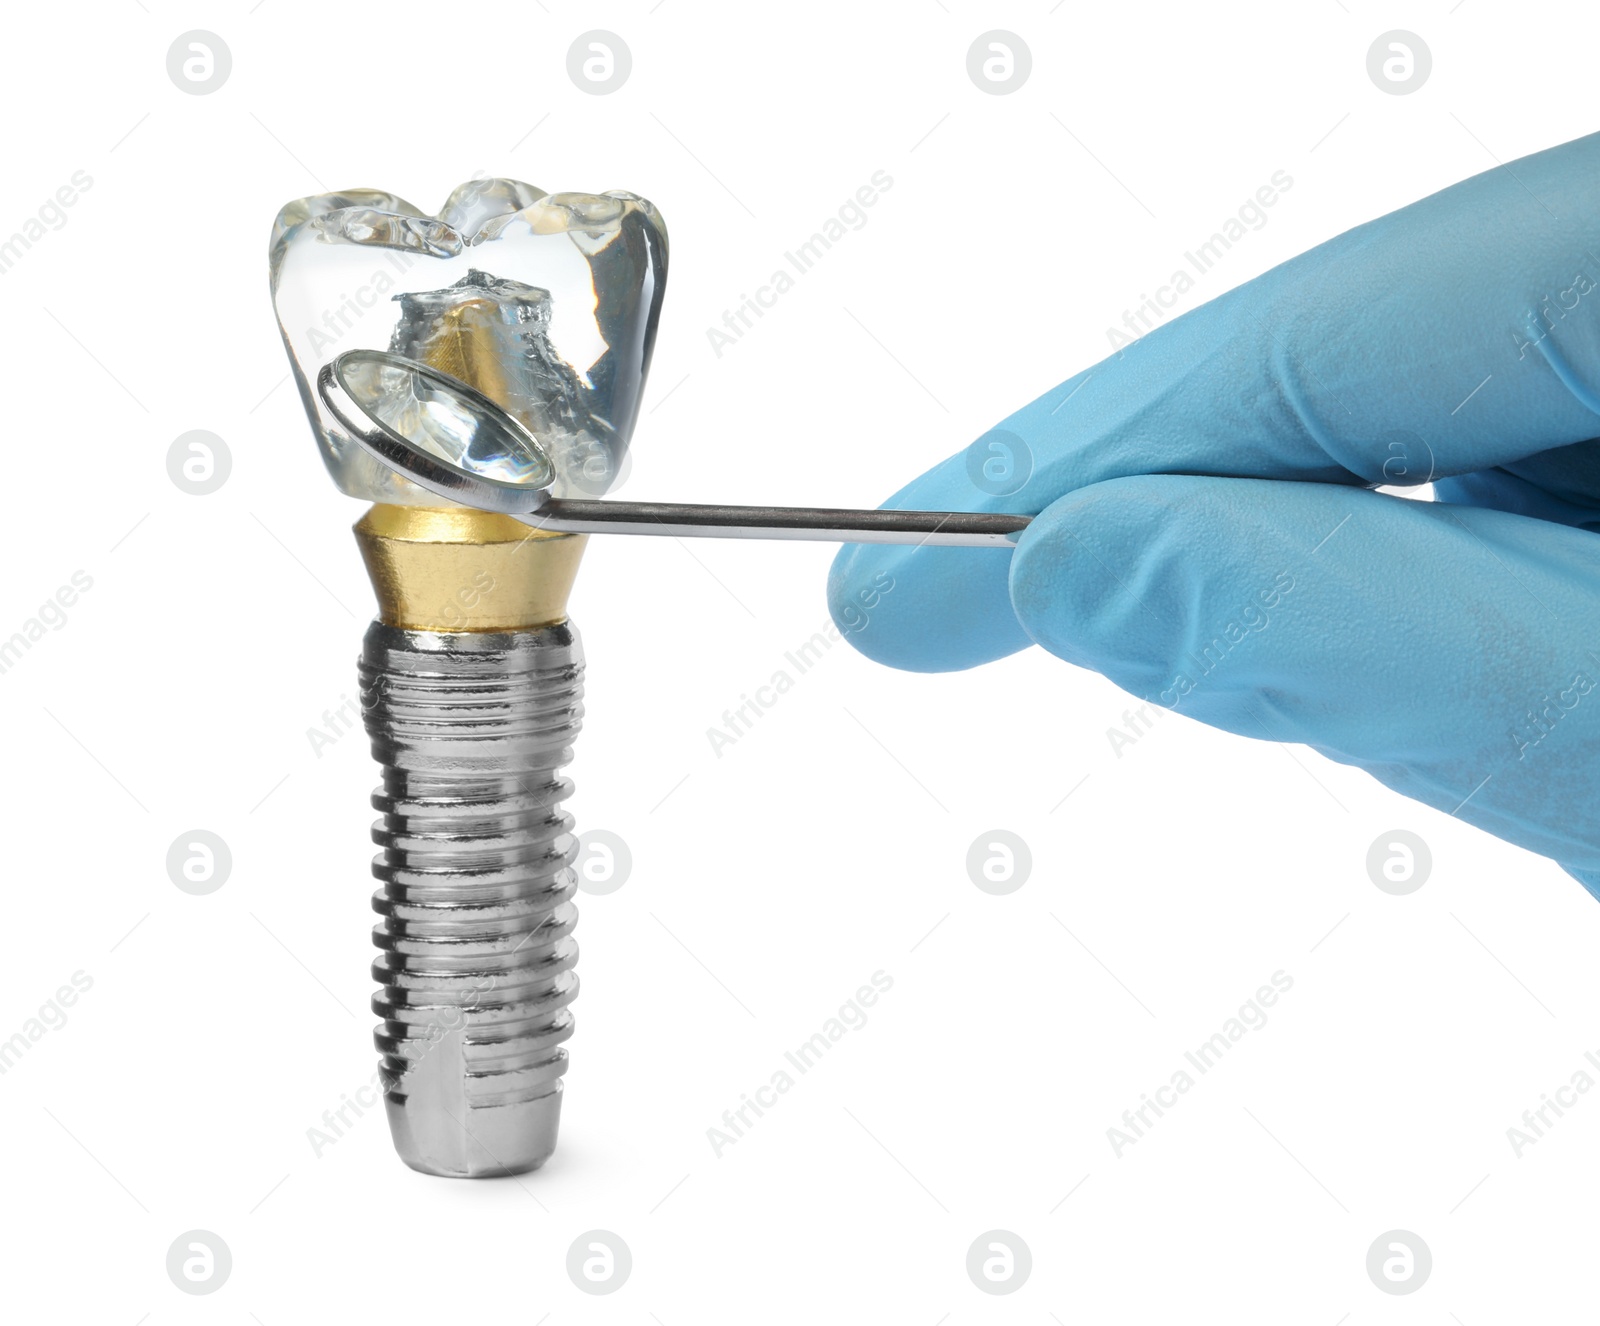 Photo of Dentist with mirror pointing at educational model of dental implant on white background, closeup